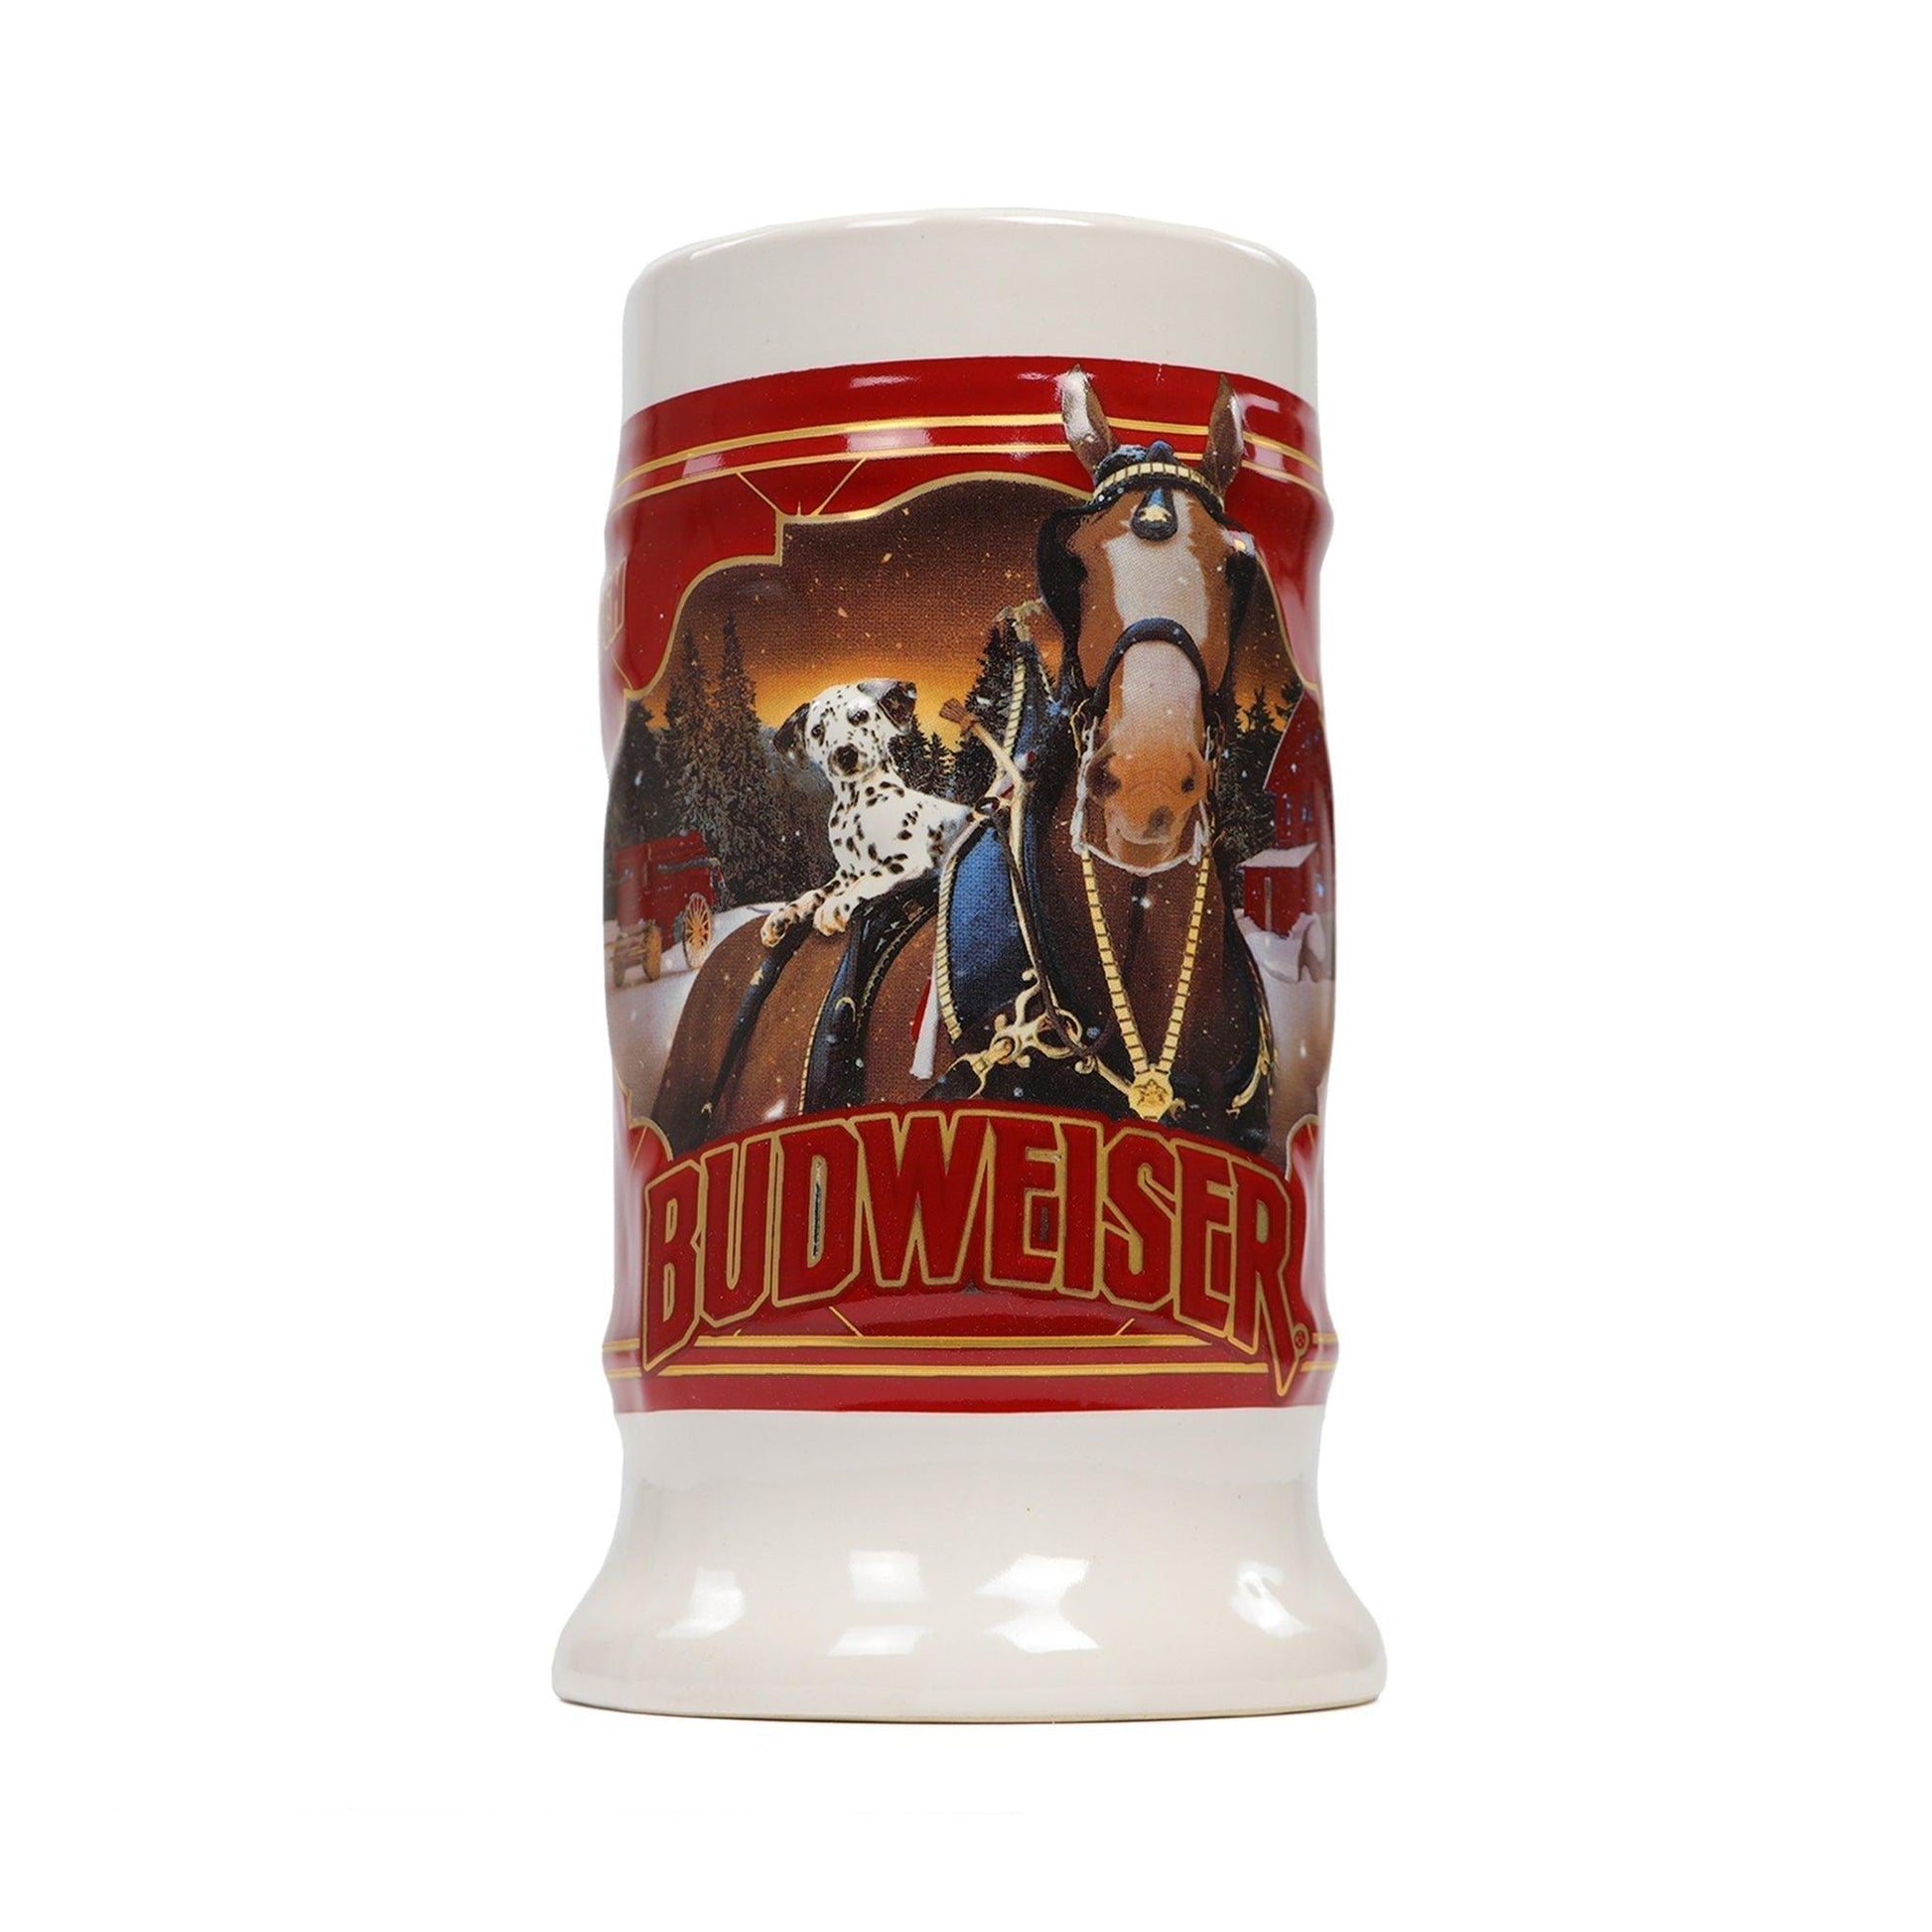 2022 Budweiser Holiday Stein - Front View